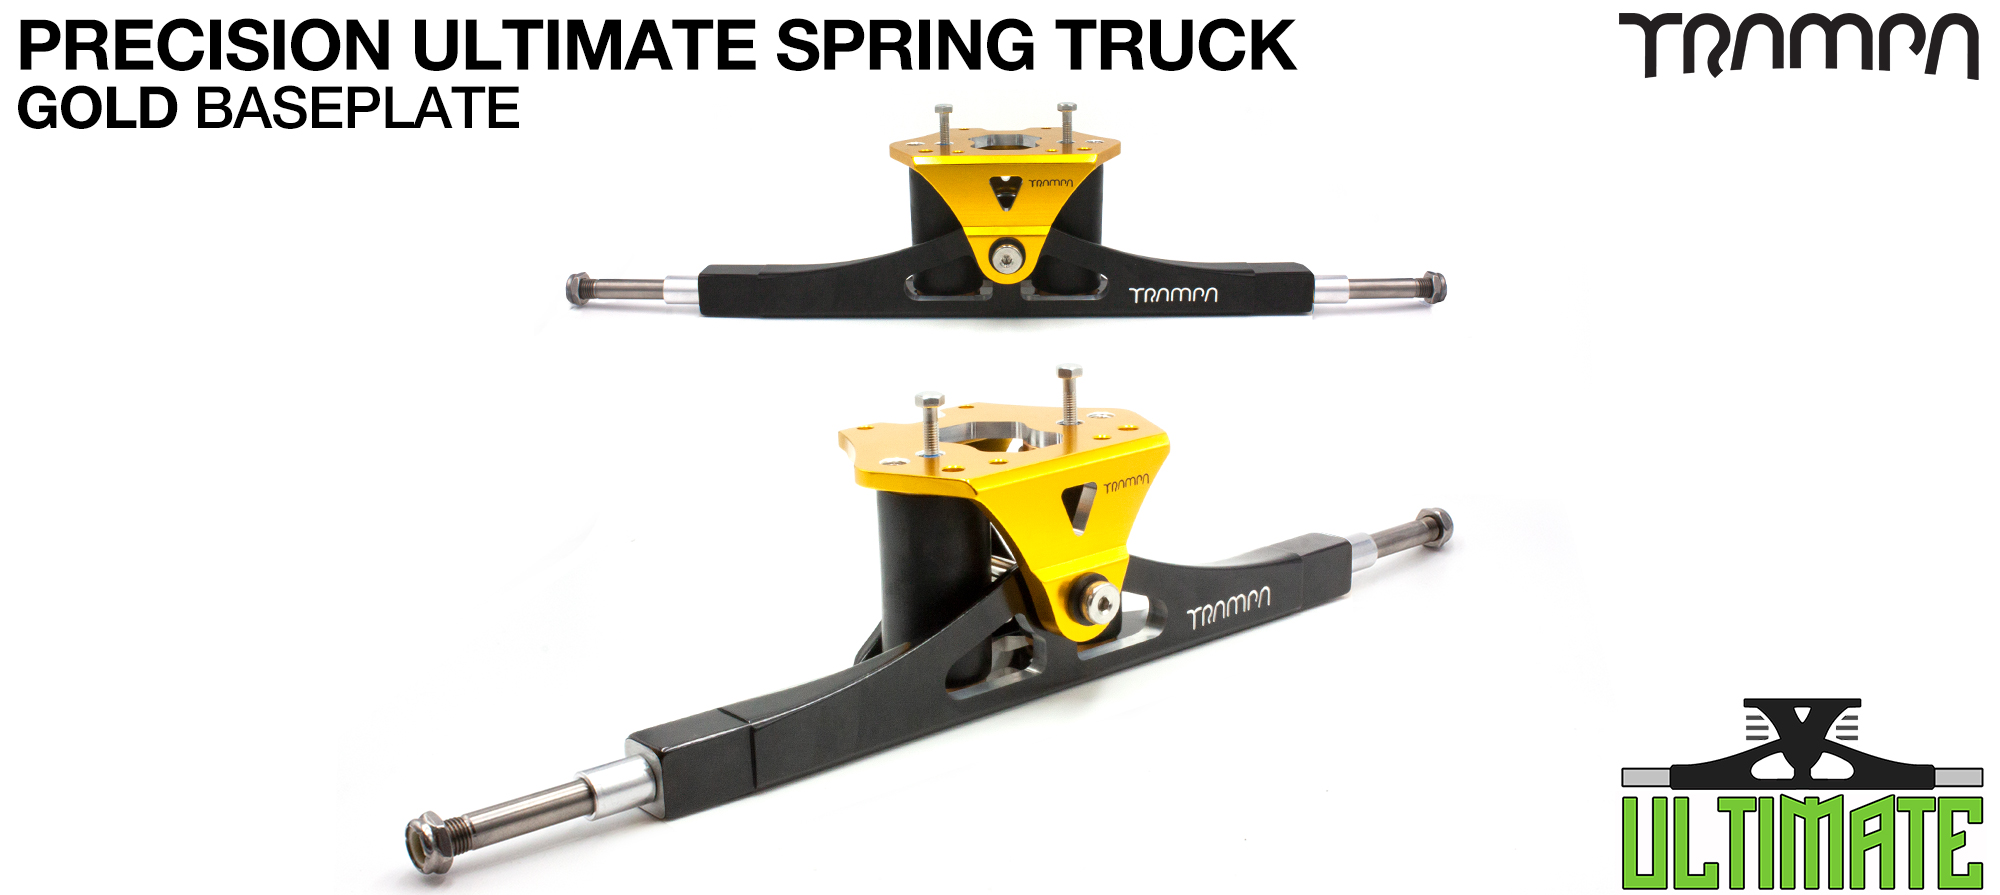 Precision CNC ULTIMATE ATB TRUCK with CNC Motor Mount fixing points, GOLD Baseplate, TITANIUM Axles & Kingpin